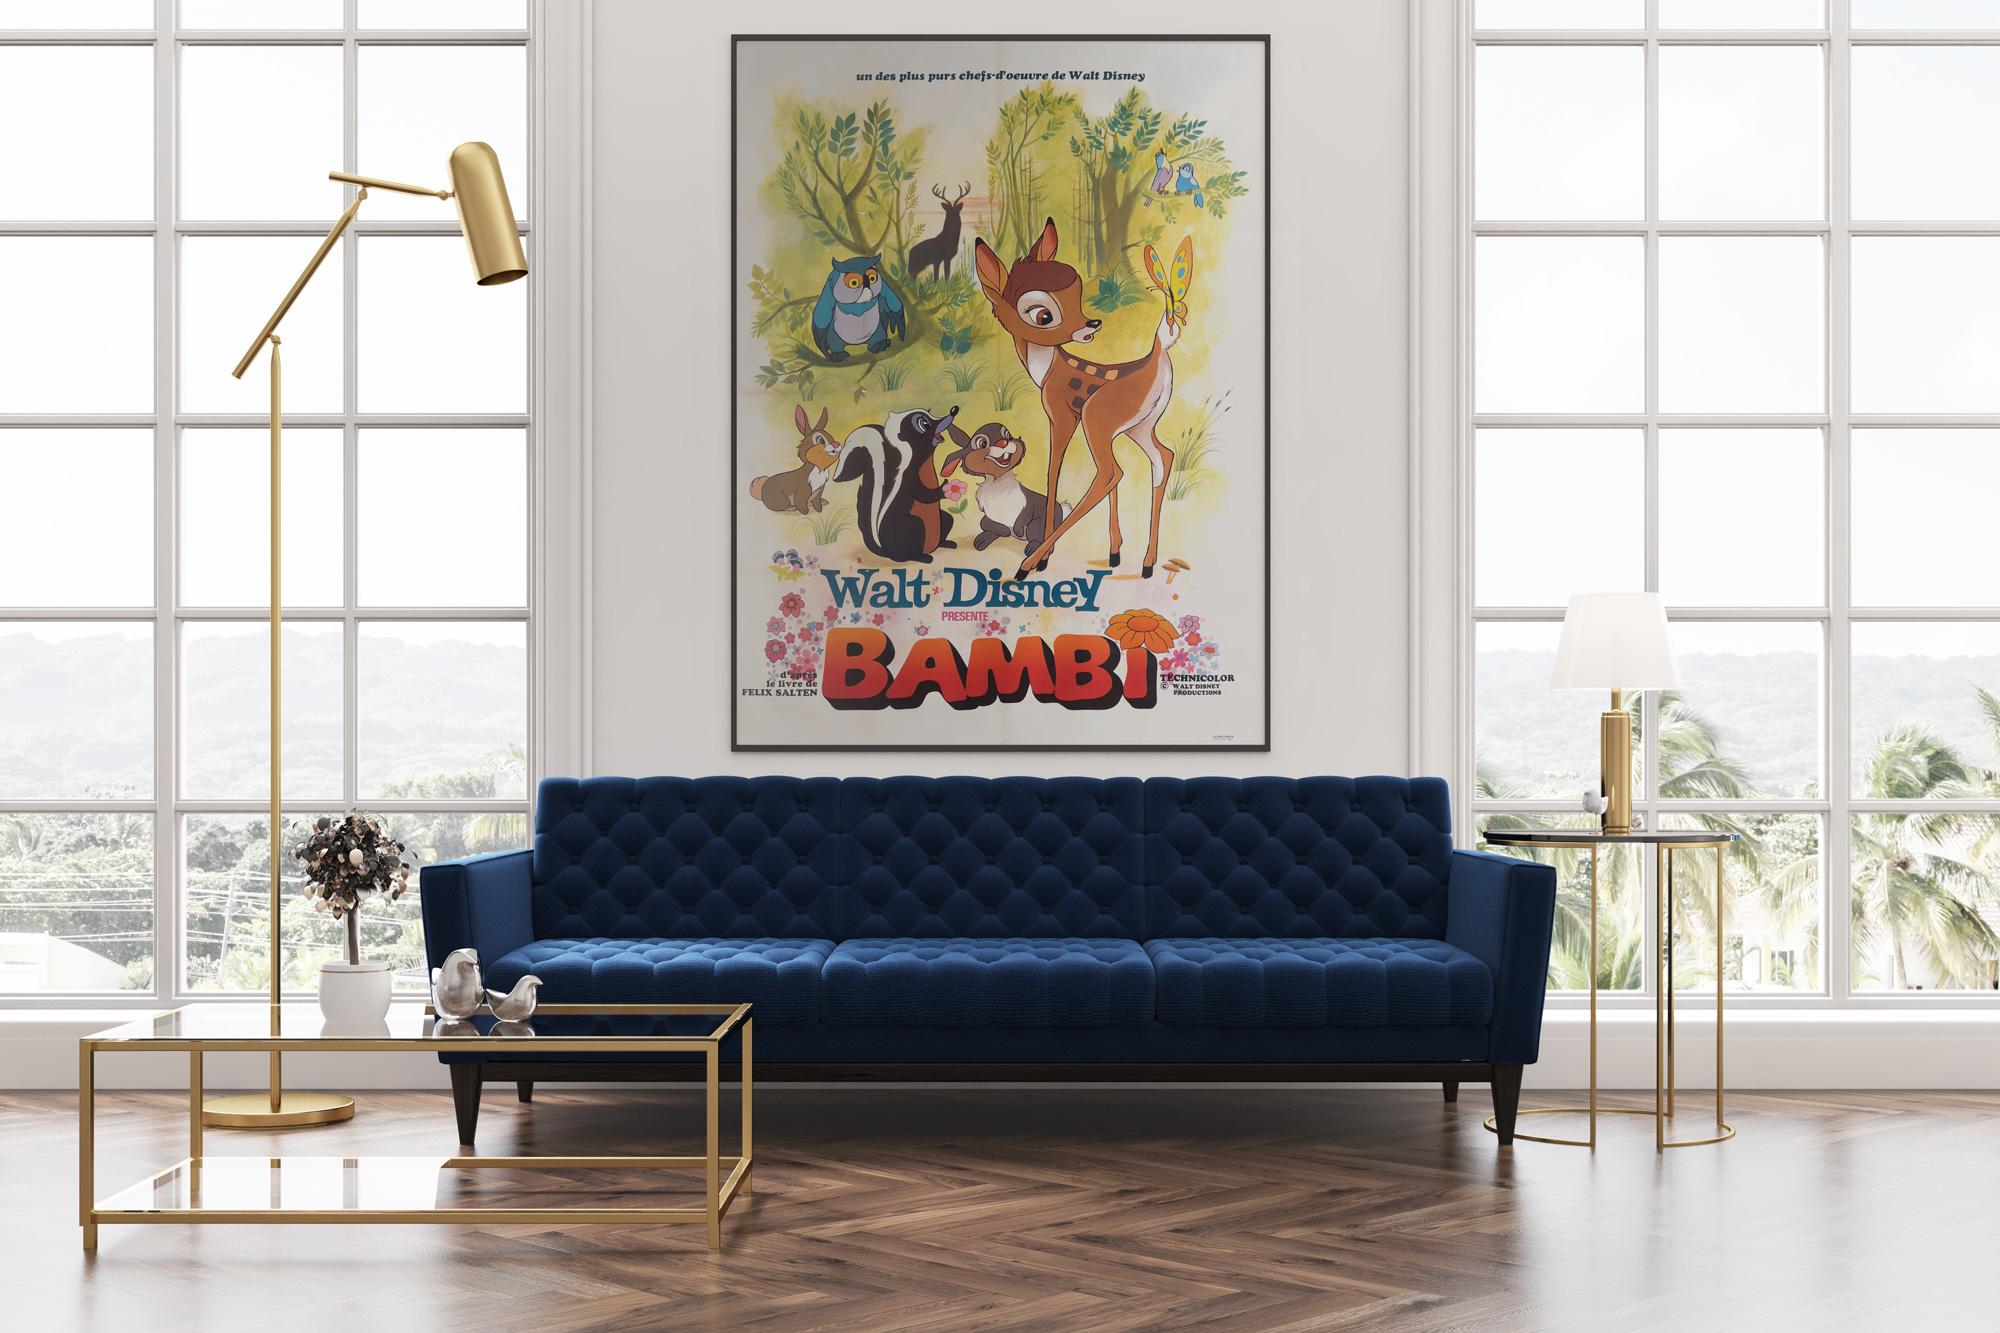 We love this charming original French film poster for 60s re-release of Disney classic Bambi. A wonderfully softly illustrated poster in fabulous condition.

This vintage movie poster was folded (as issued) but has been professionally linen-backed